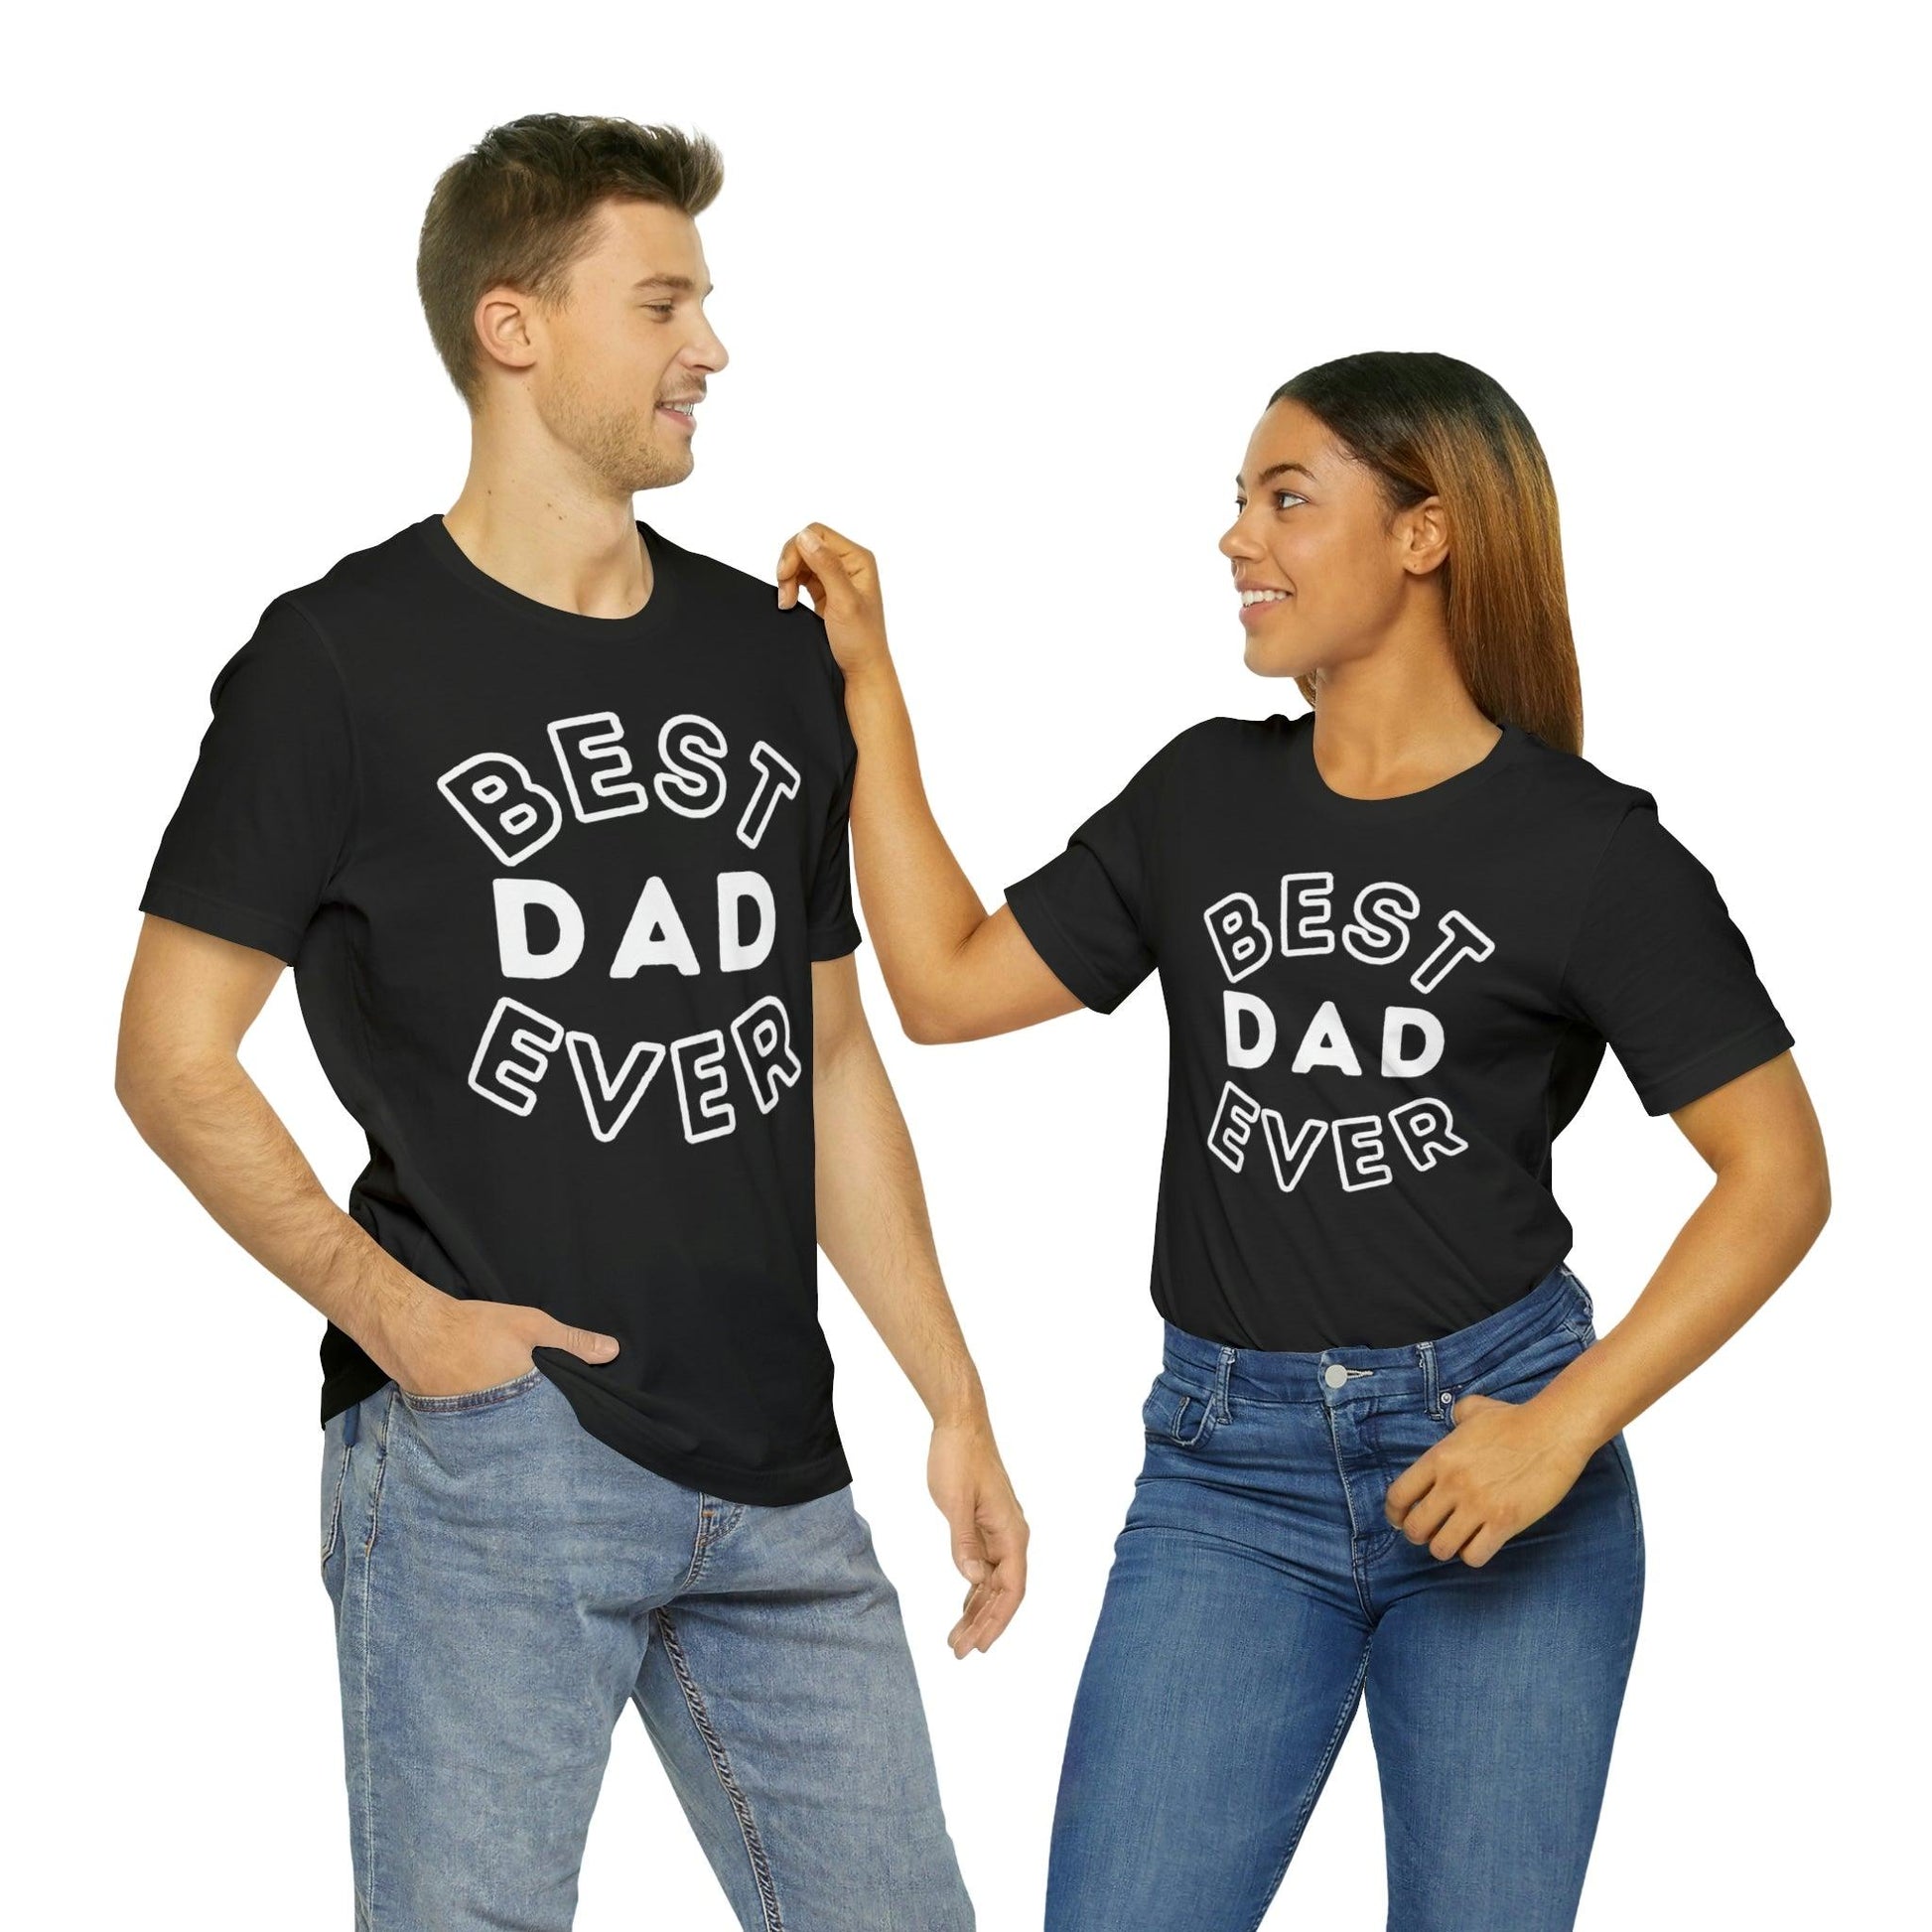 Dad Gift - Best Dad Gift - Best Super Dad Ever Shirt -Dad Shirt - Funny Fathers Gift - Husband Gift - Funny Dad Tshirt - Dad Birthday Gift - Giftsmojo